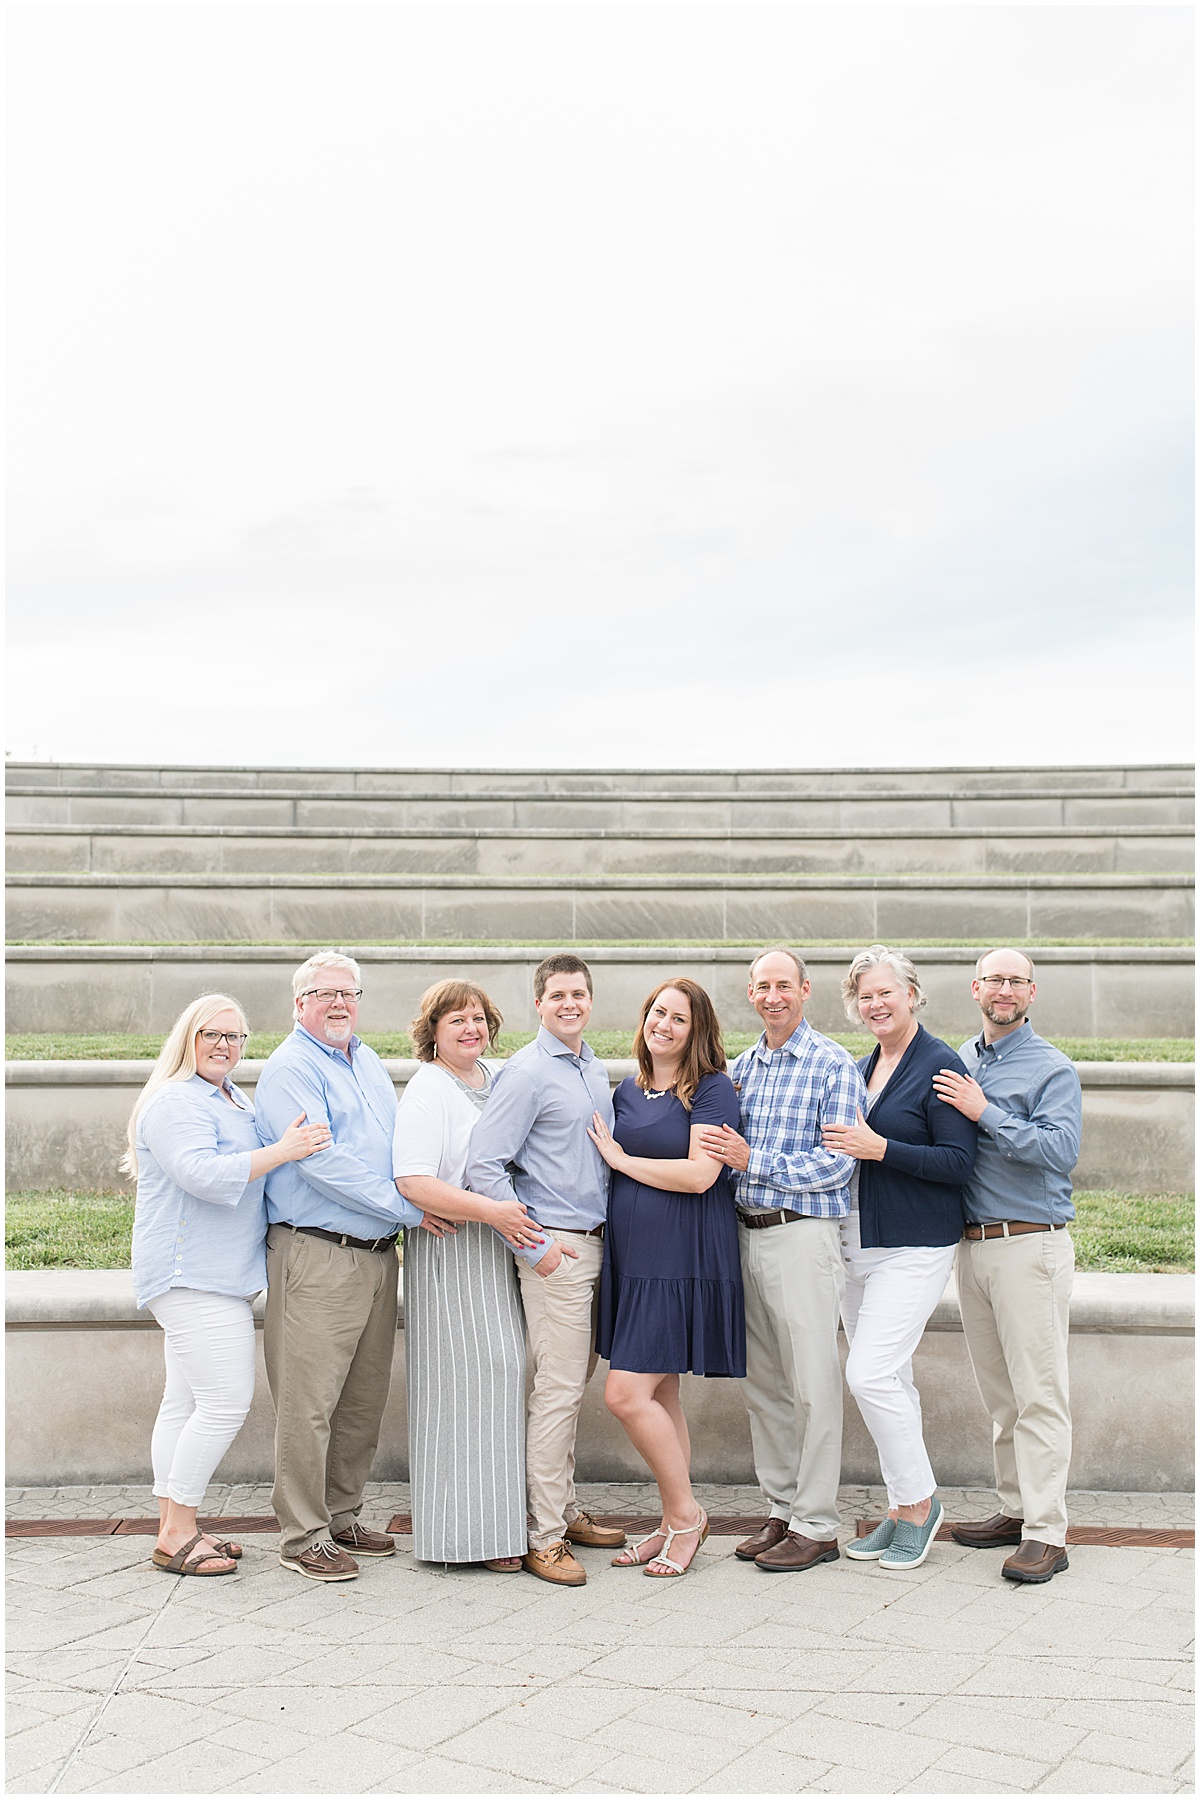 Extended family photos at Coxhall Gardens in Carmel, Indiana